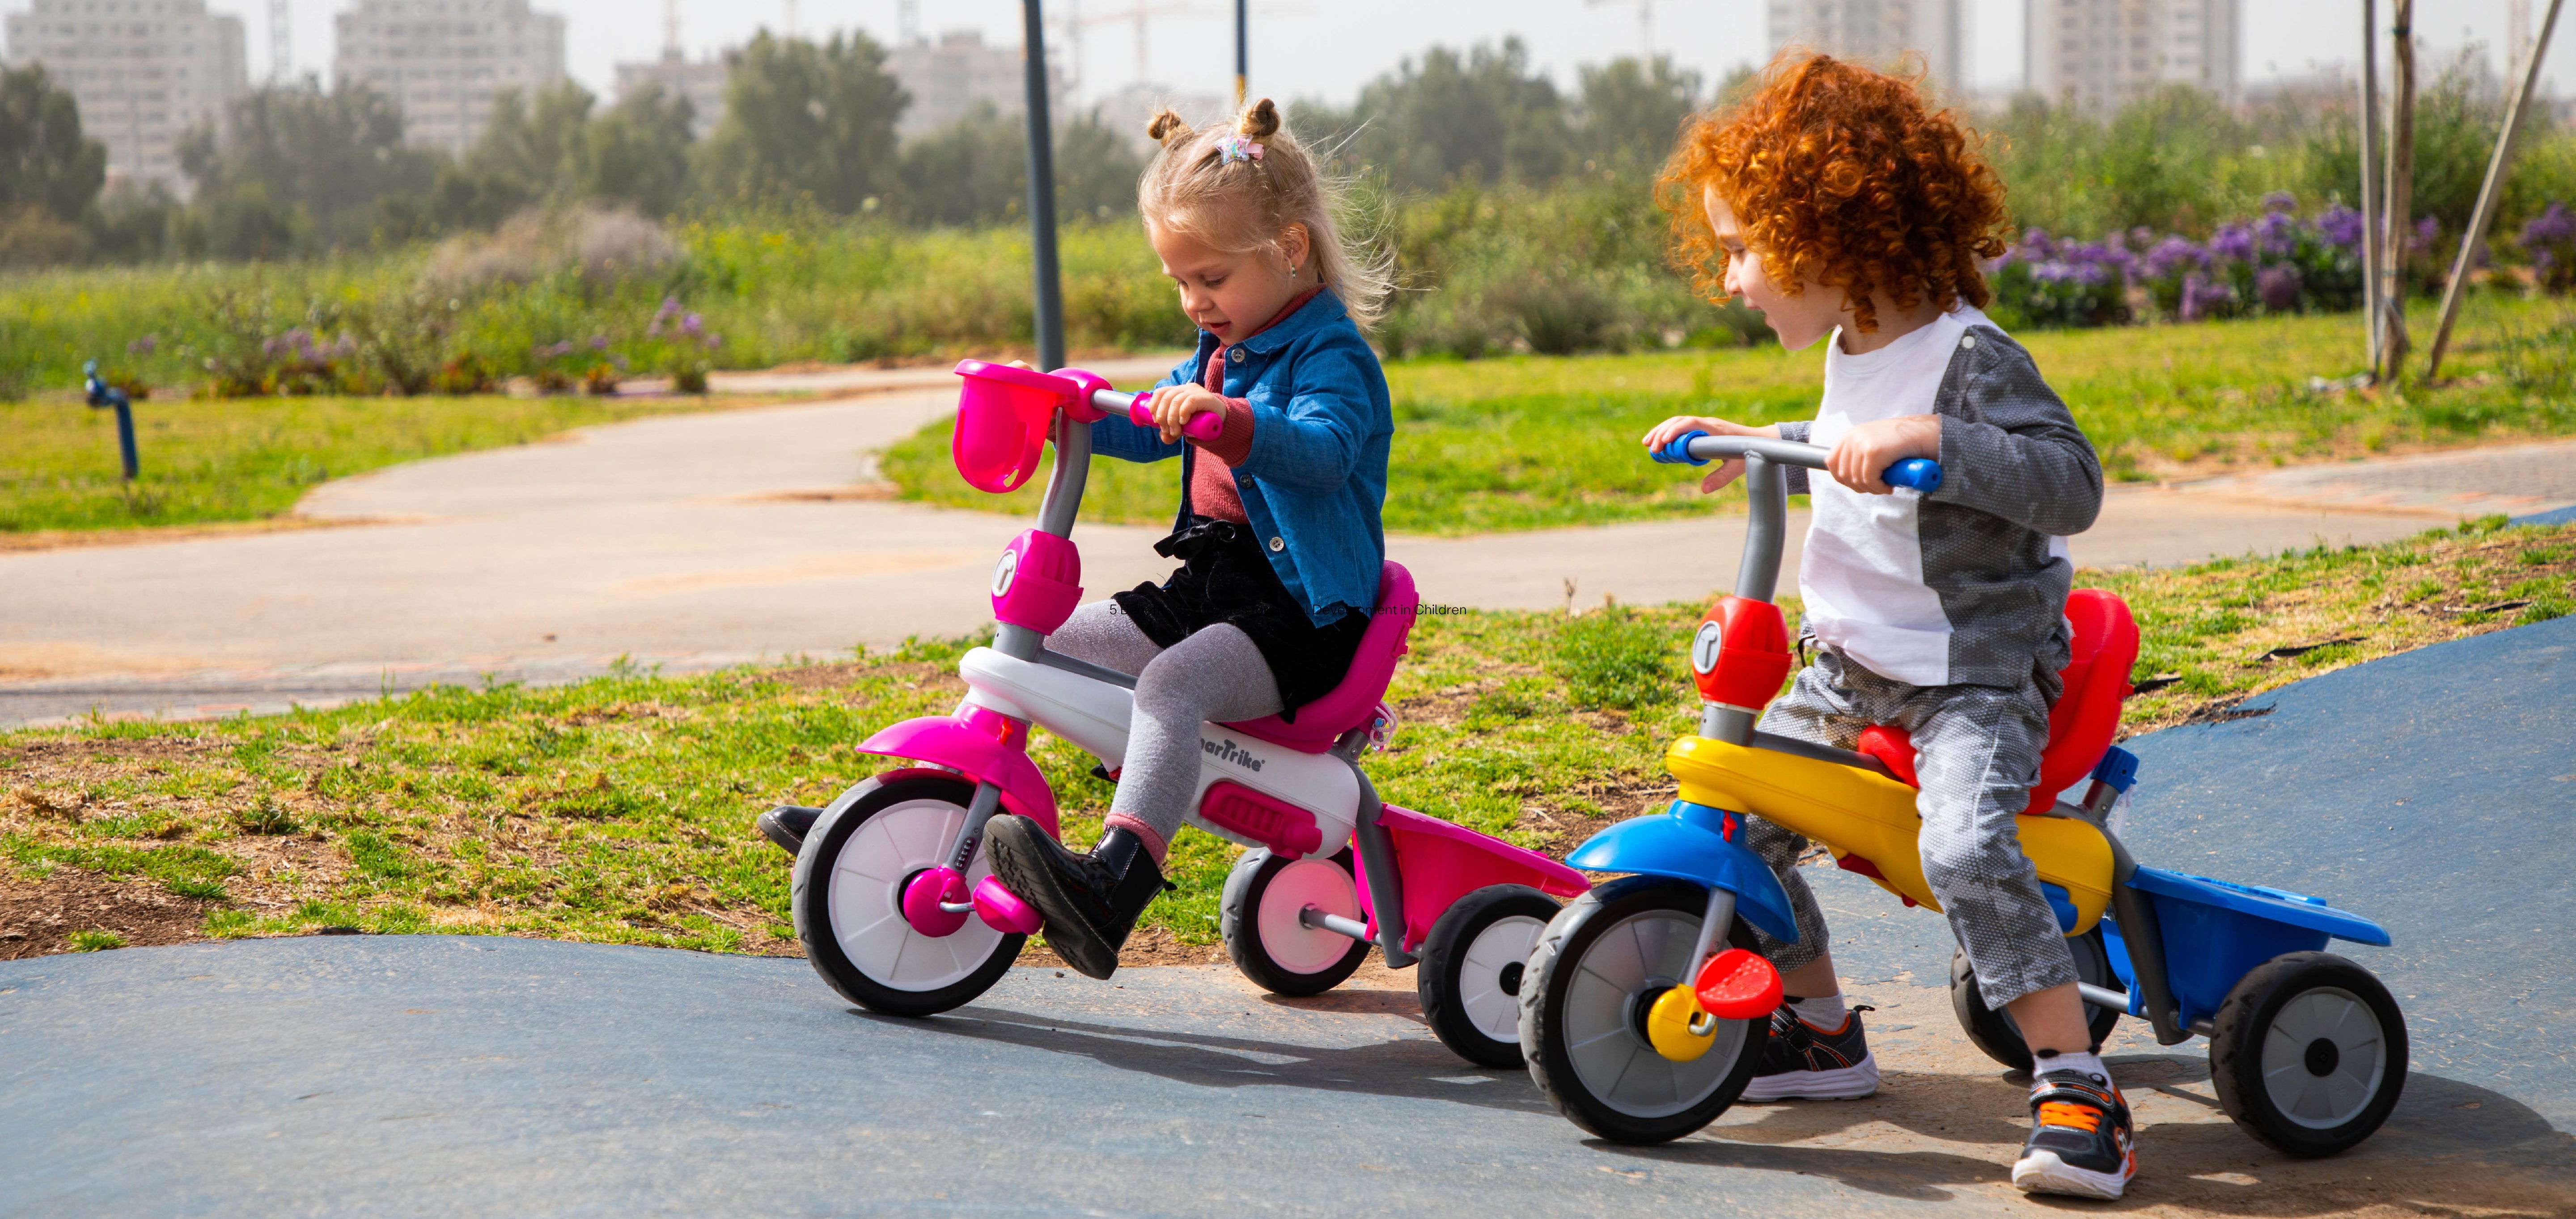 5 Benefits of Tricycles for Social Development in Children